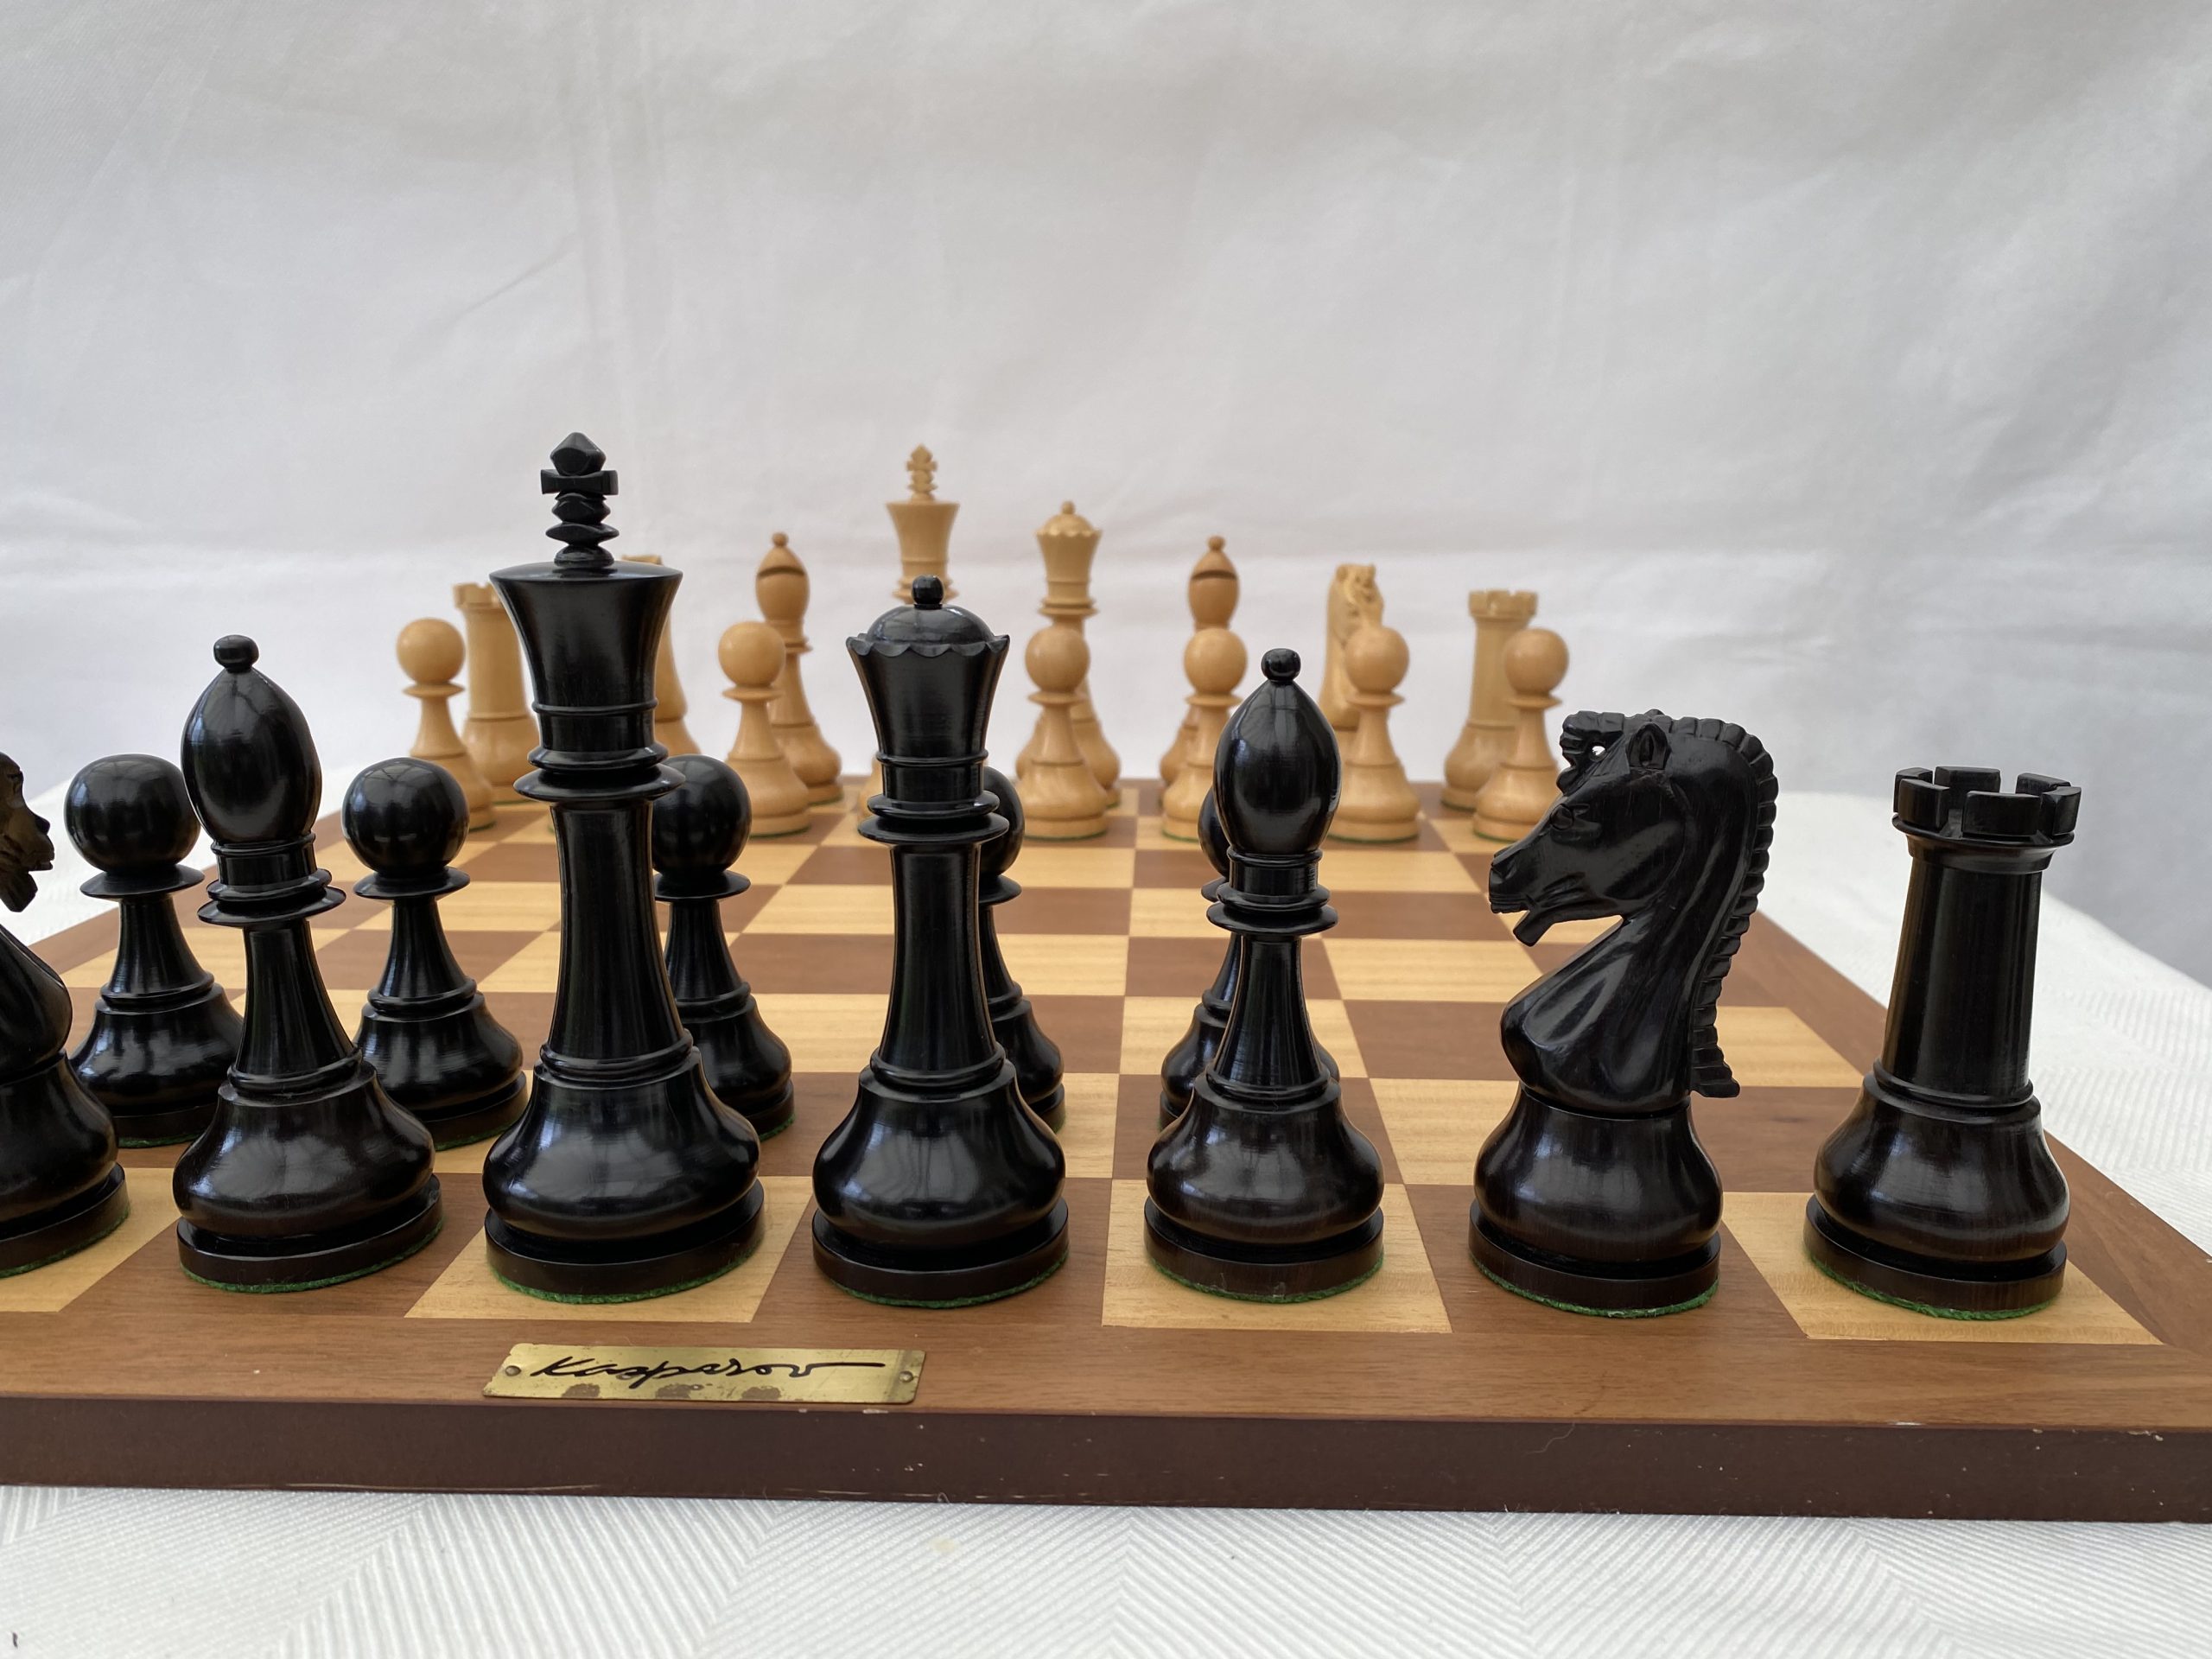 Ebony Chess Board with Rosewood Border - 2in Squares - ChessBaron Chess  Sets Canada - Call (213) 325 6540